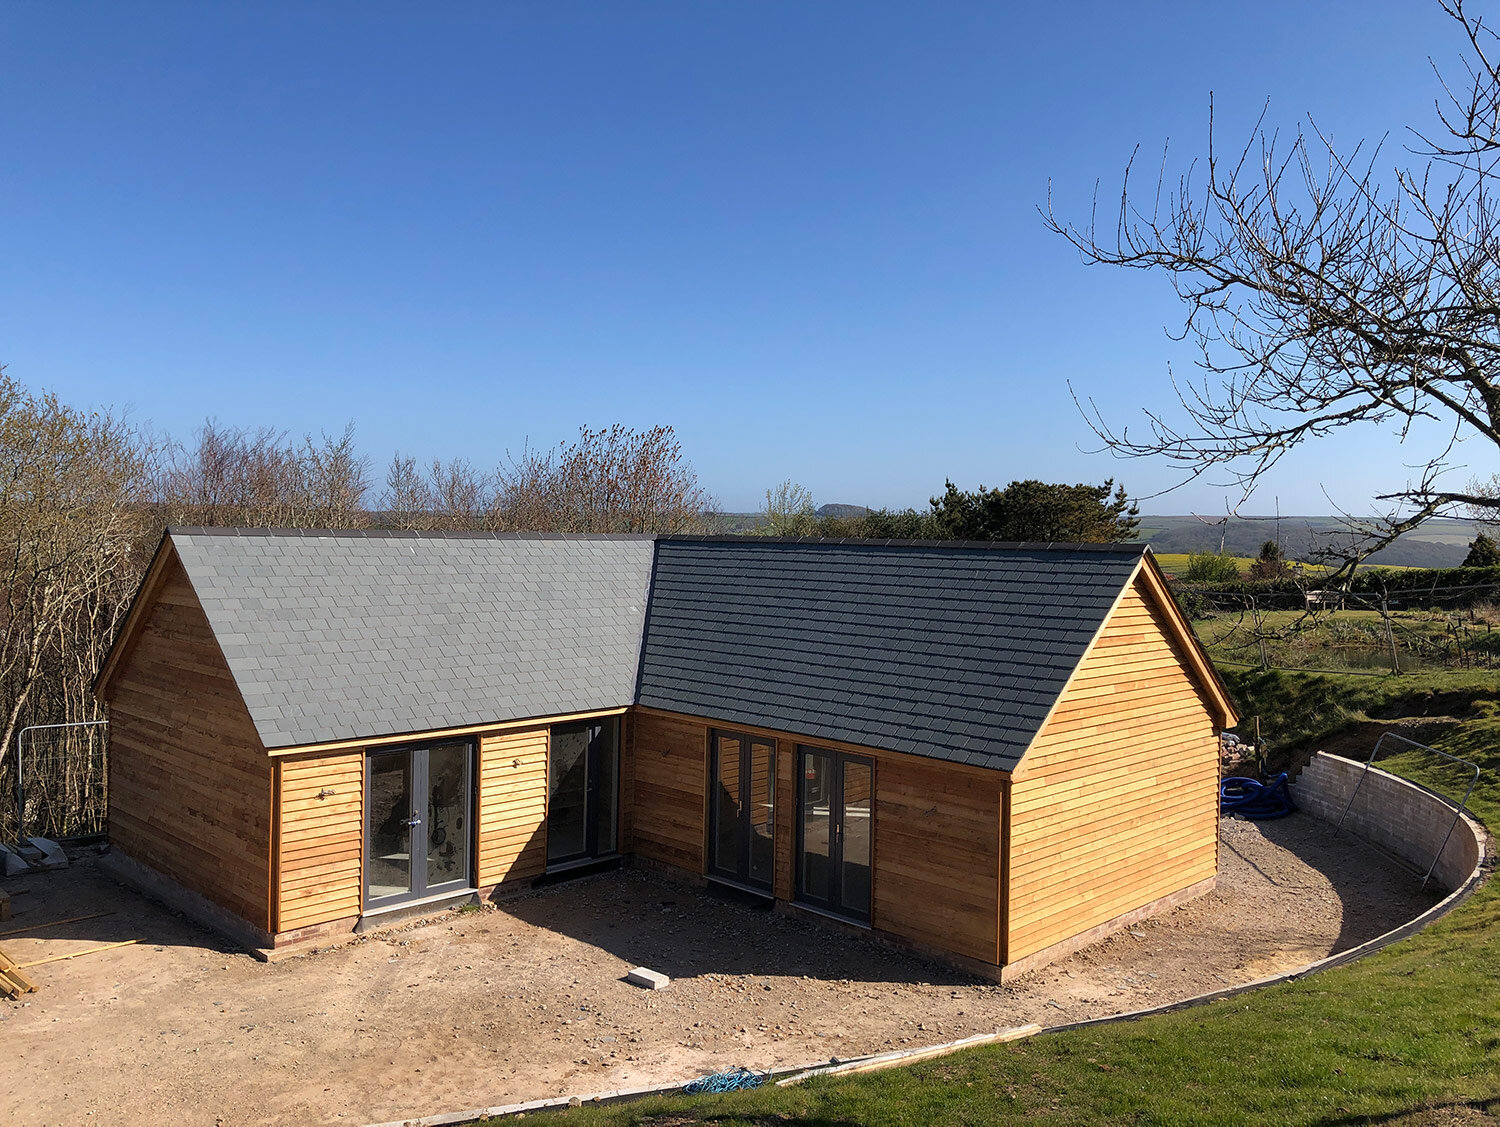 New Oak framed building with Larch cladding